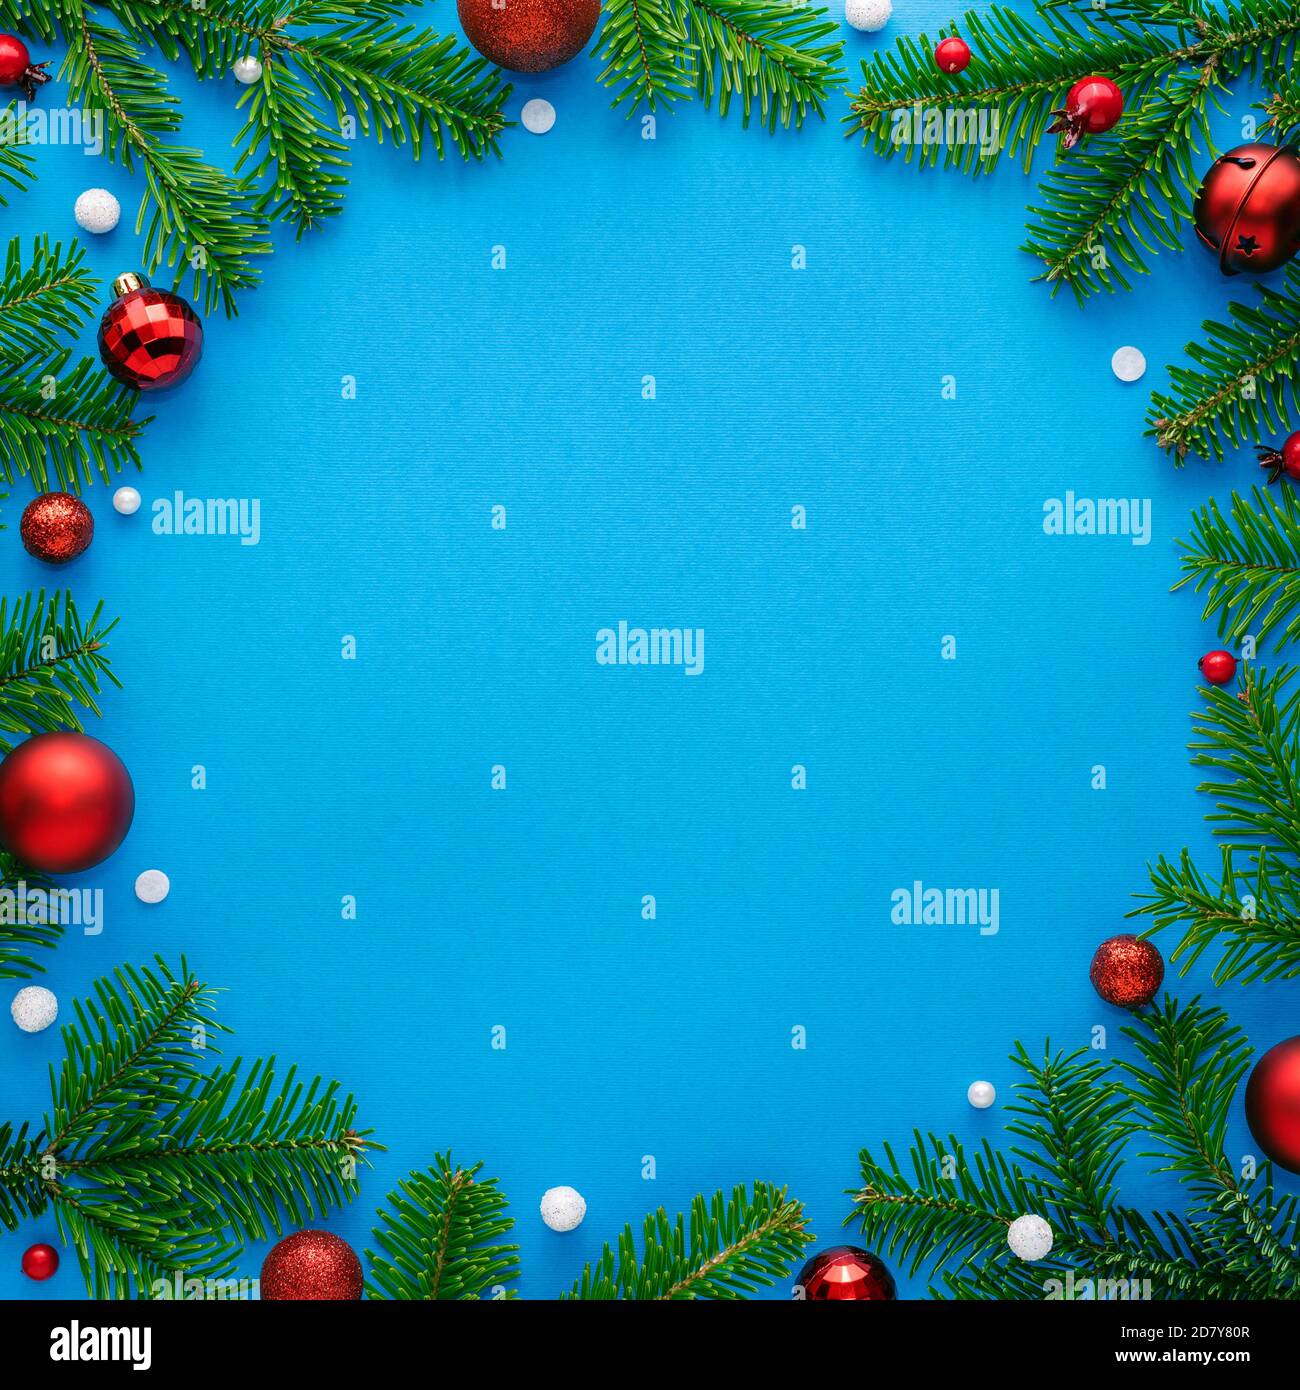 Blue christmas card with round frame decorated with festive ornaments. Copy space for festive text. Top view Stock Photo